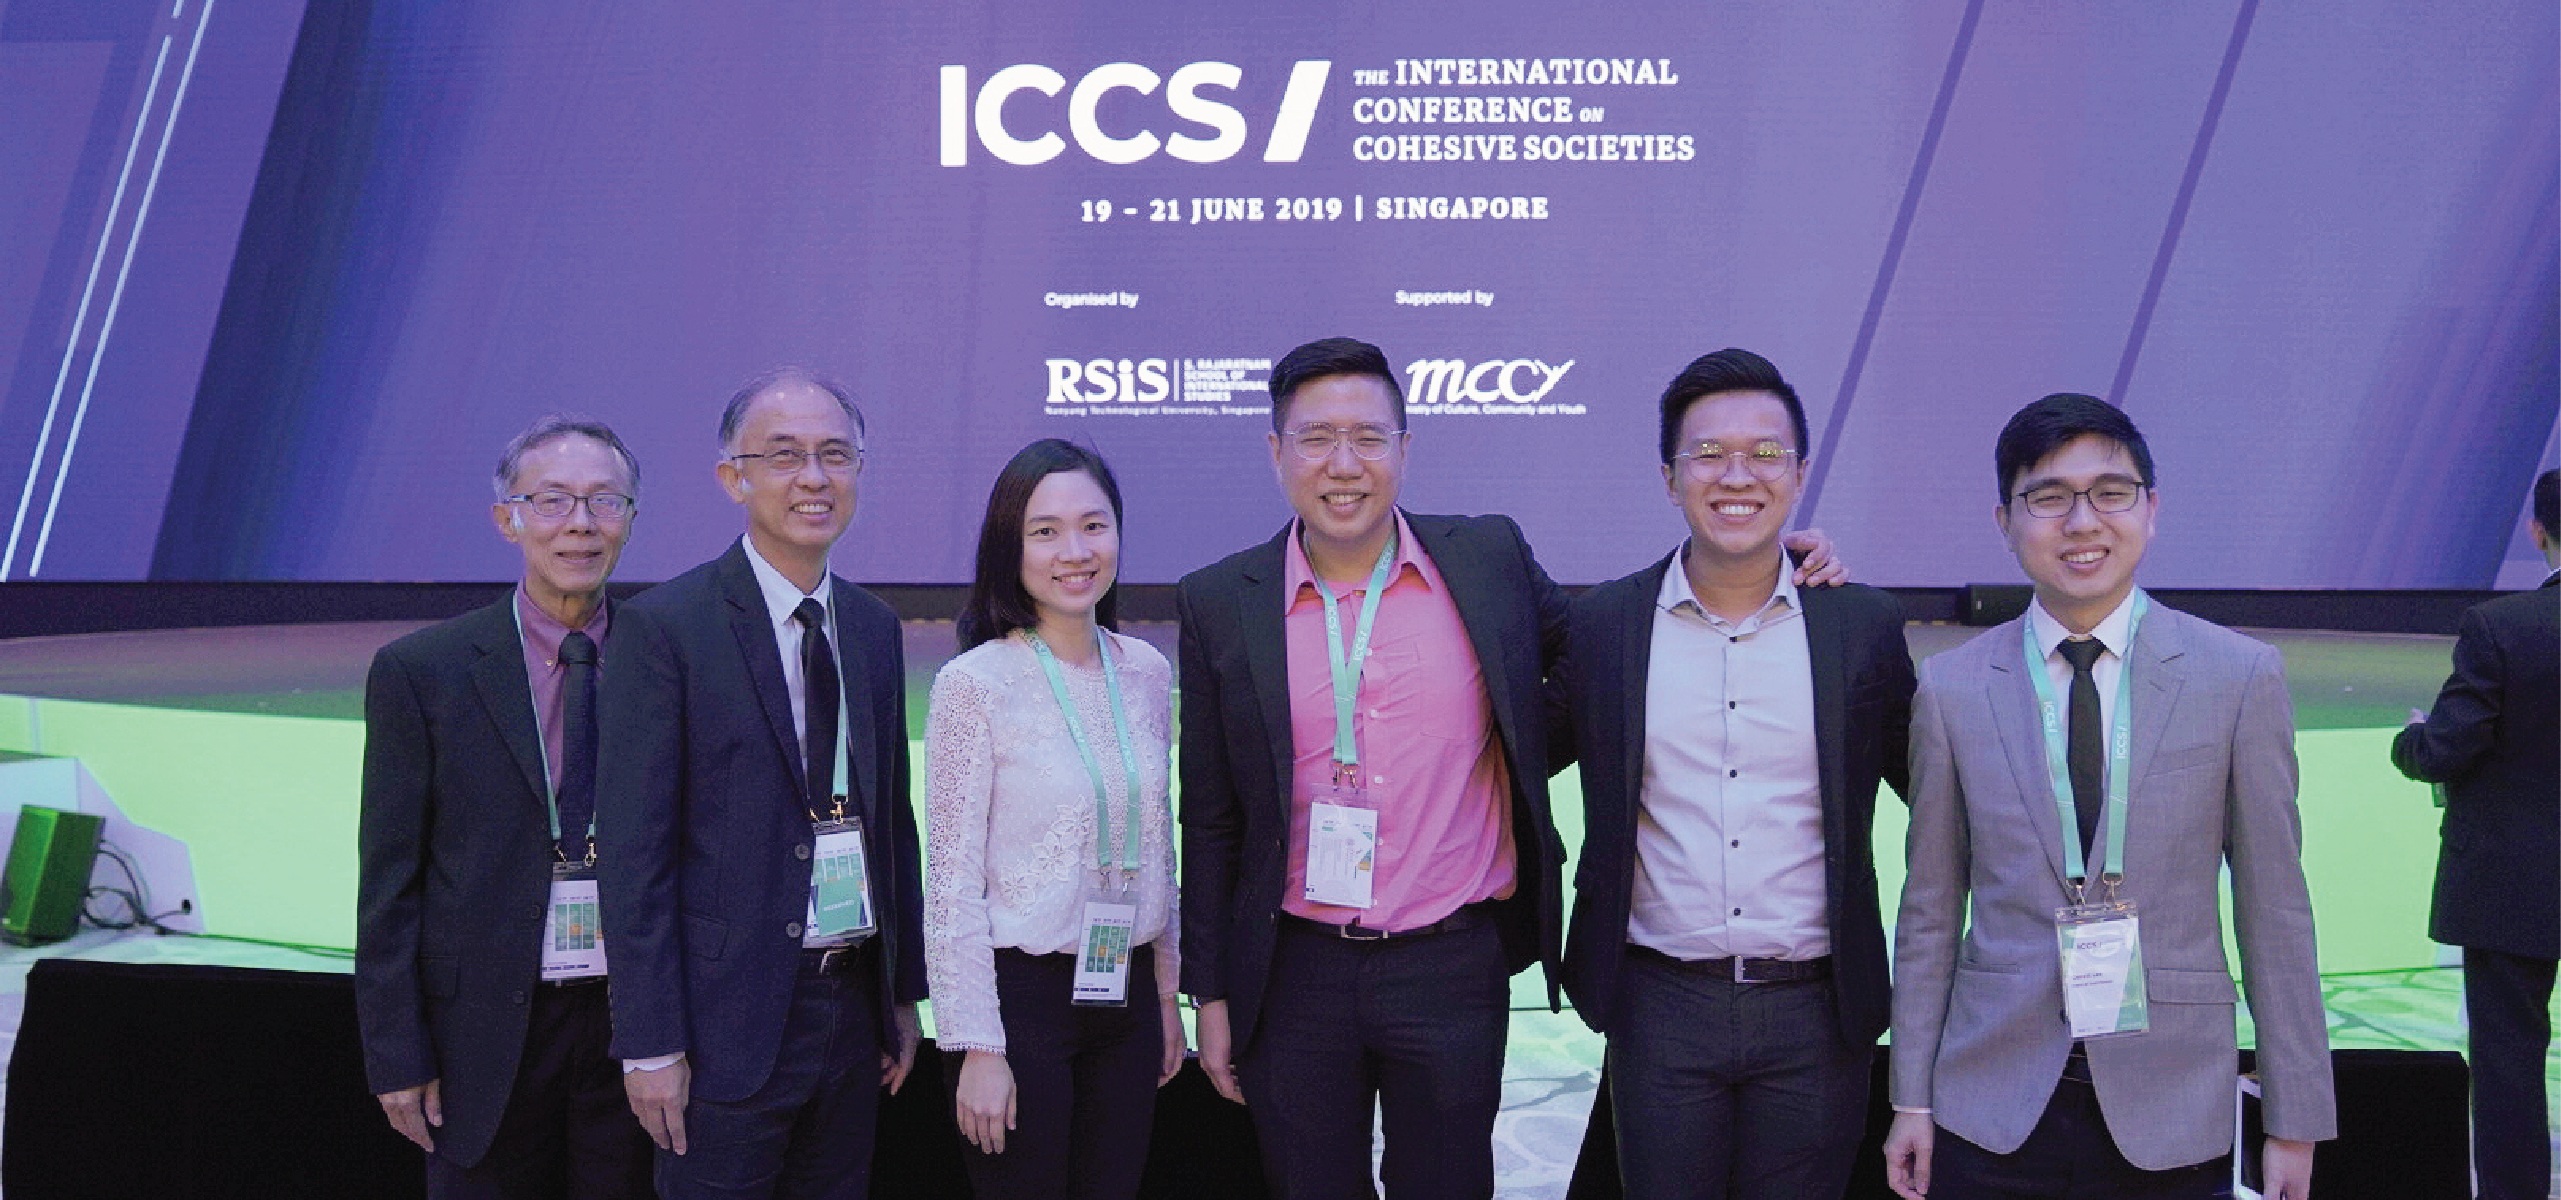 Heart of God Church (Singapore) at The International Conference on Cohesive Societies (ICCS)